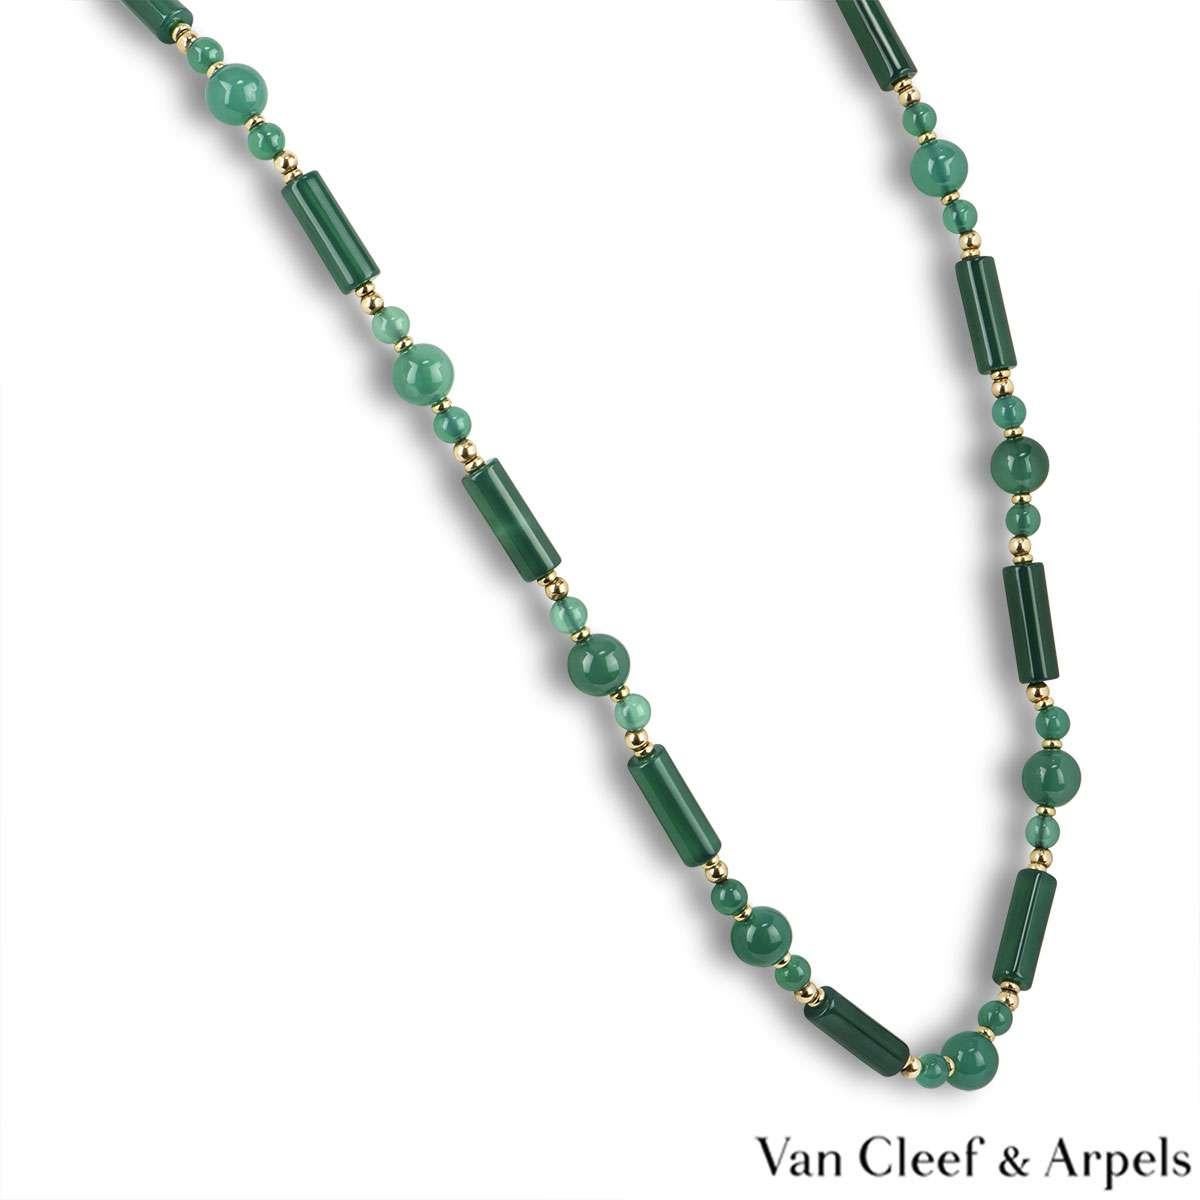 A beautiful 14k yellow gold necklace by Van Cleef & Arpels. The green chalcedony necklace is made up of 14 cylindrical beads and 41 ball beads alternating in size. The beads are separated by yellow gold intersections. The necklace measures 30 inches